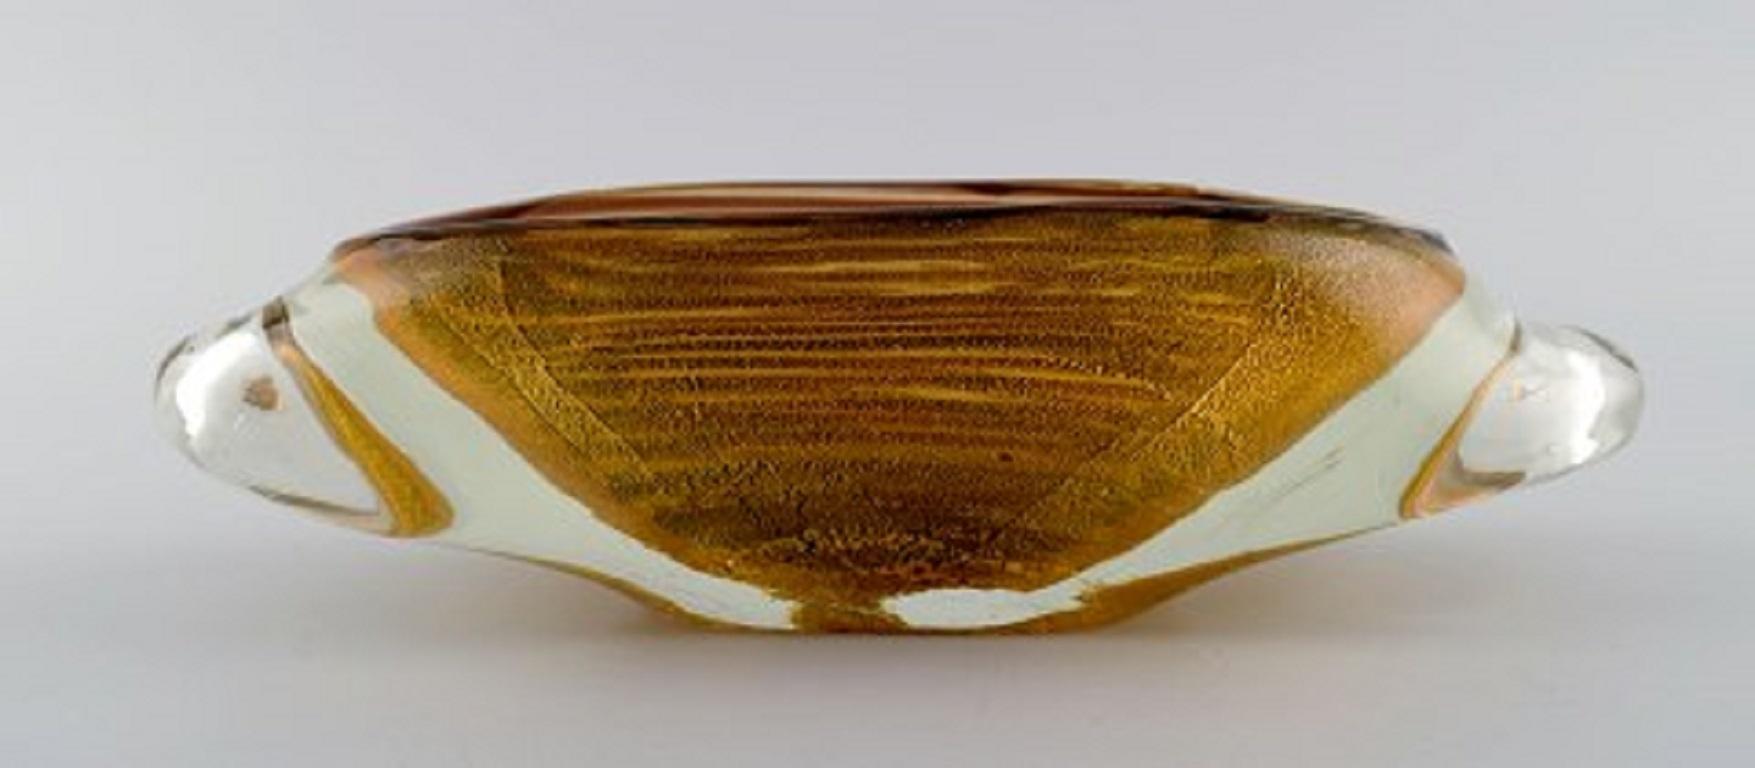 Large oval Murano bowl in mouth-blown art glass with spiral design, 1960s.
Measures: 28 x 8 cm.
In perfect condition.